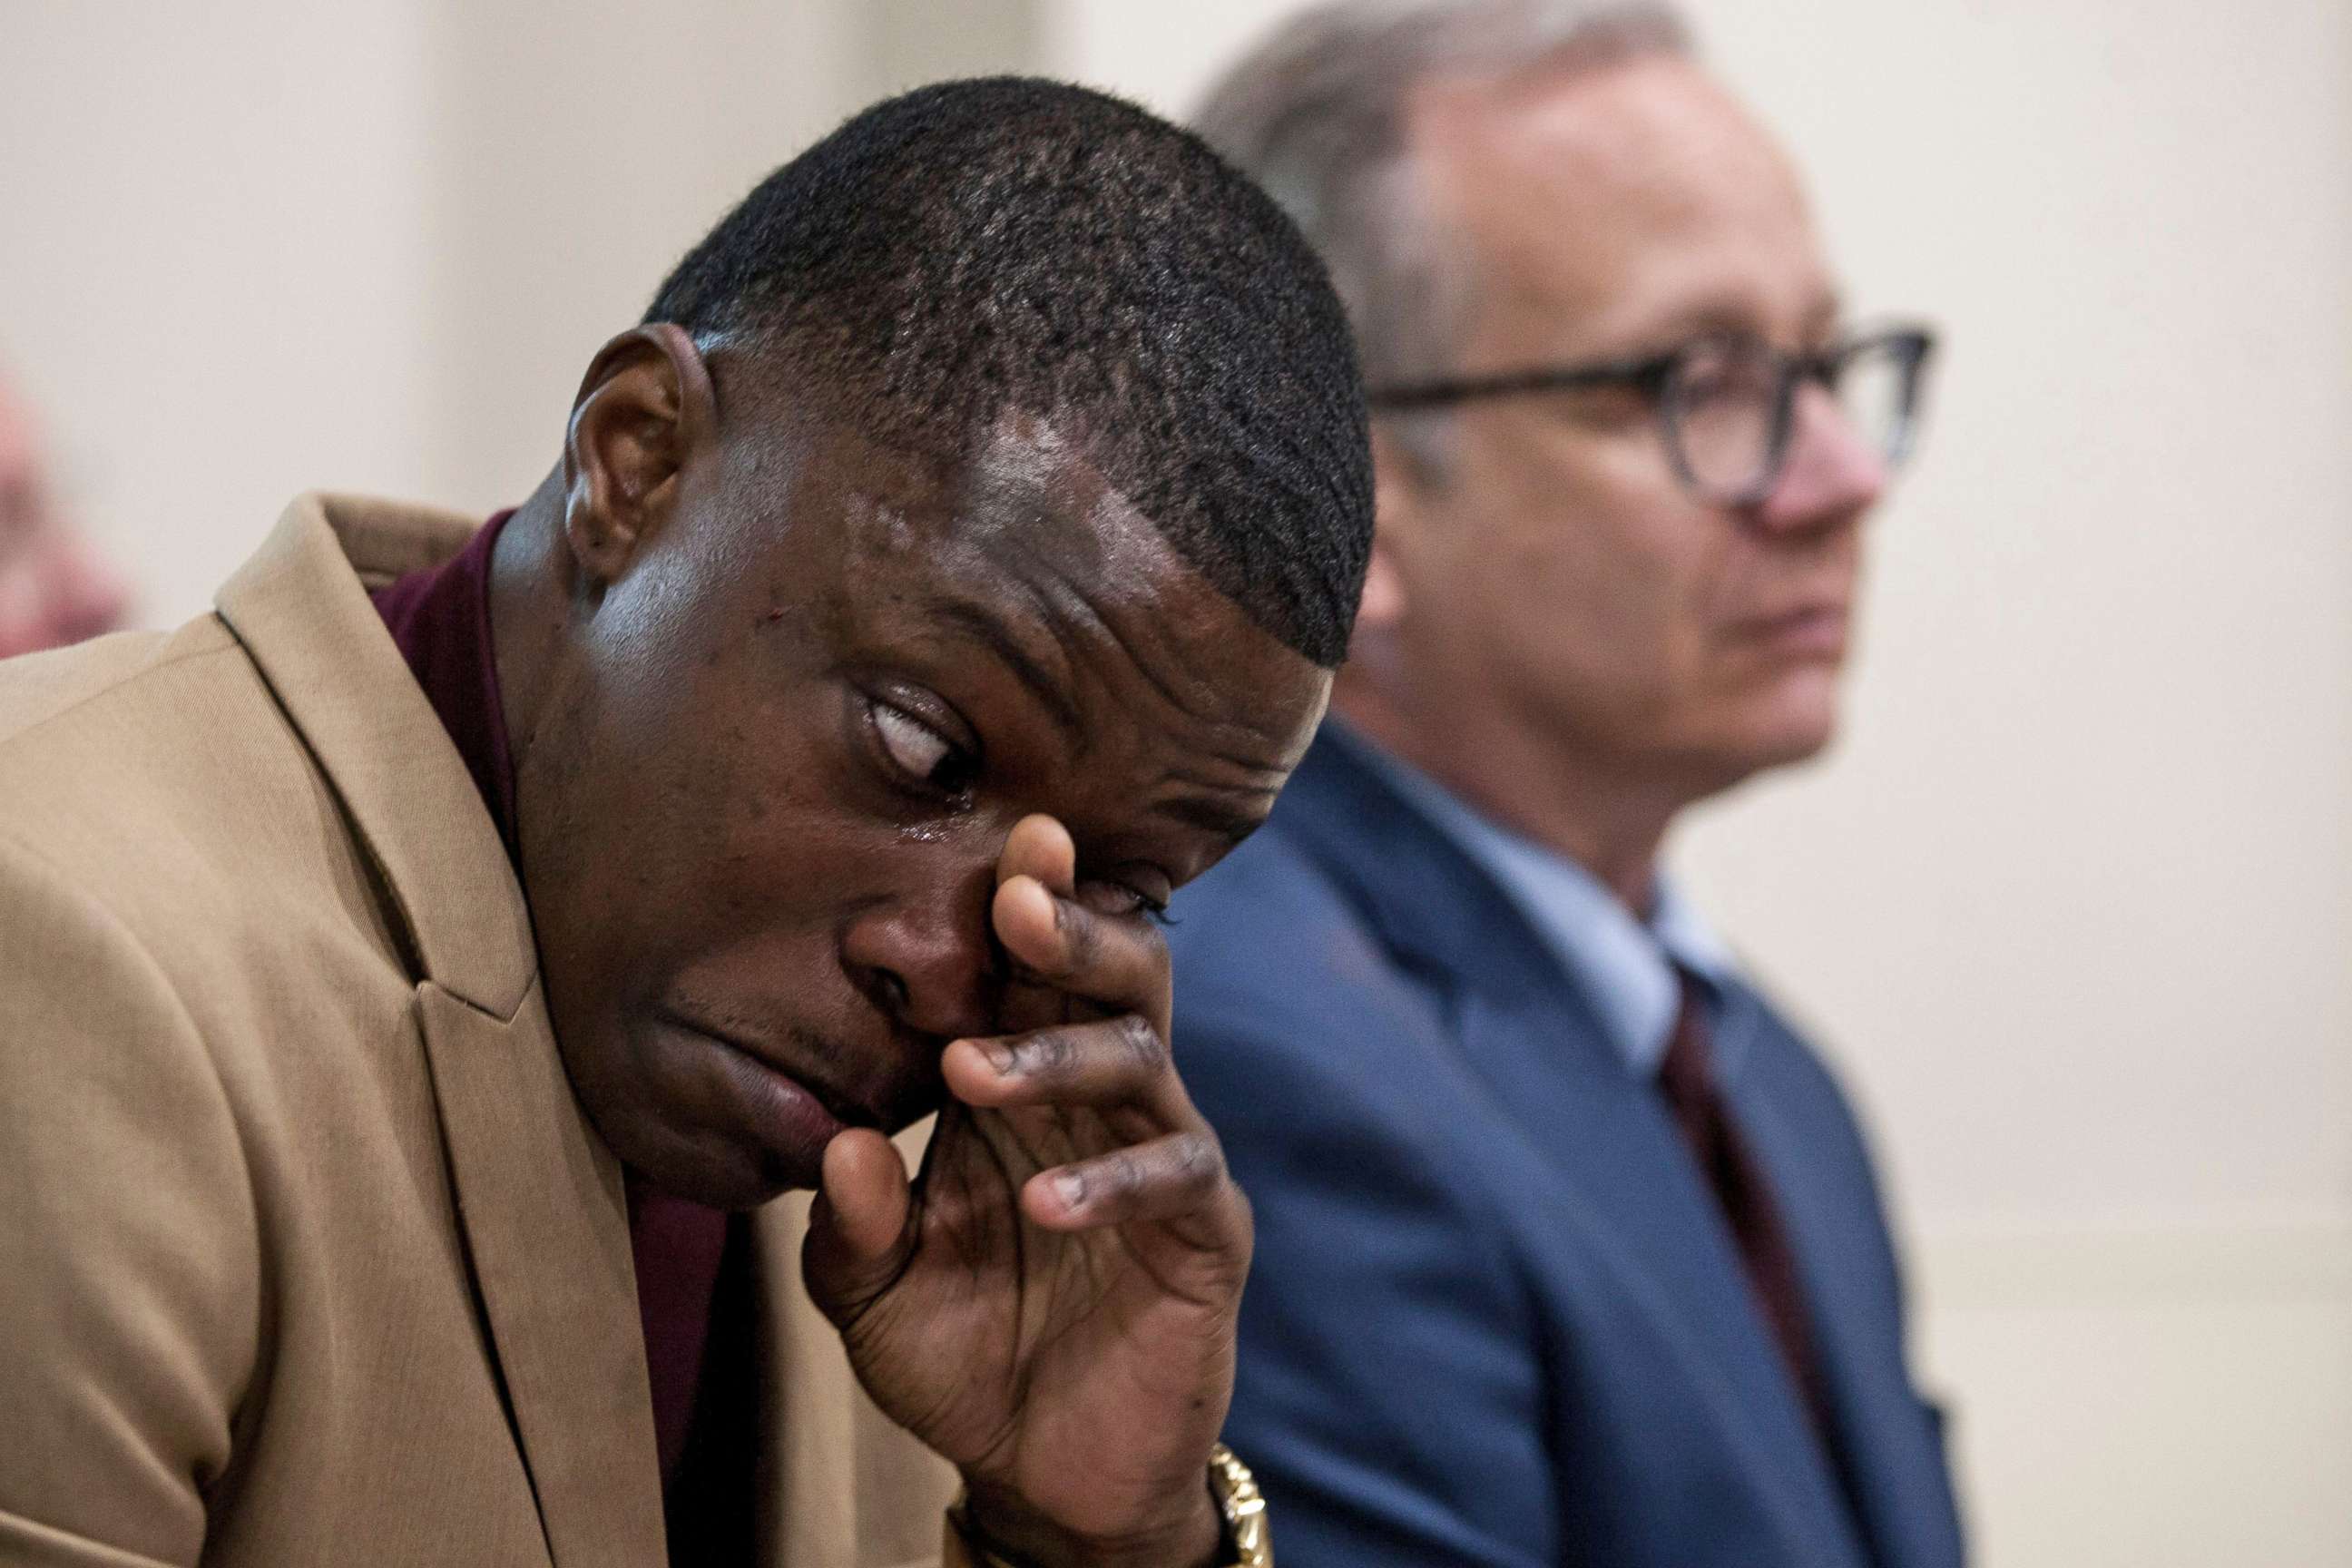 PHOTO: James Shaw Jr. wipes his tears as he was praised during a press conference in Nashville, Tenn., April 22, 2018.